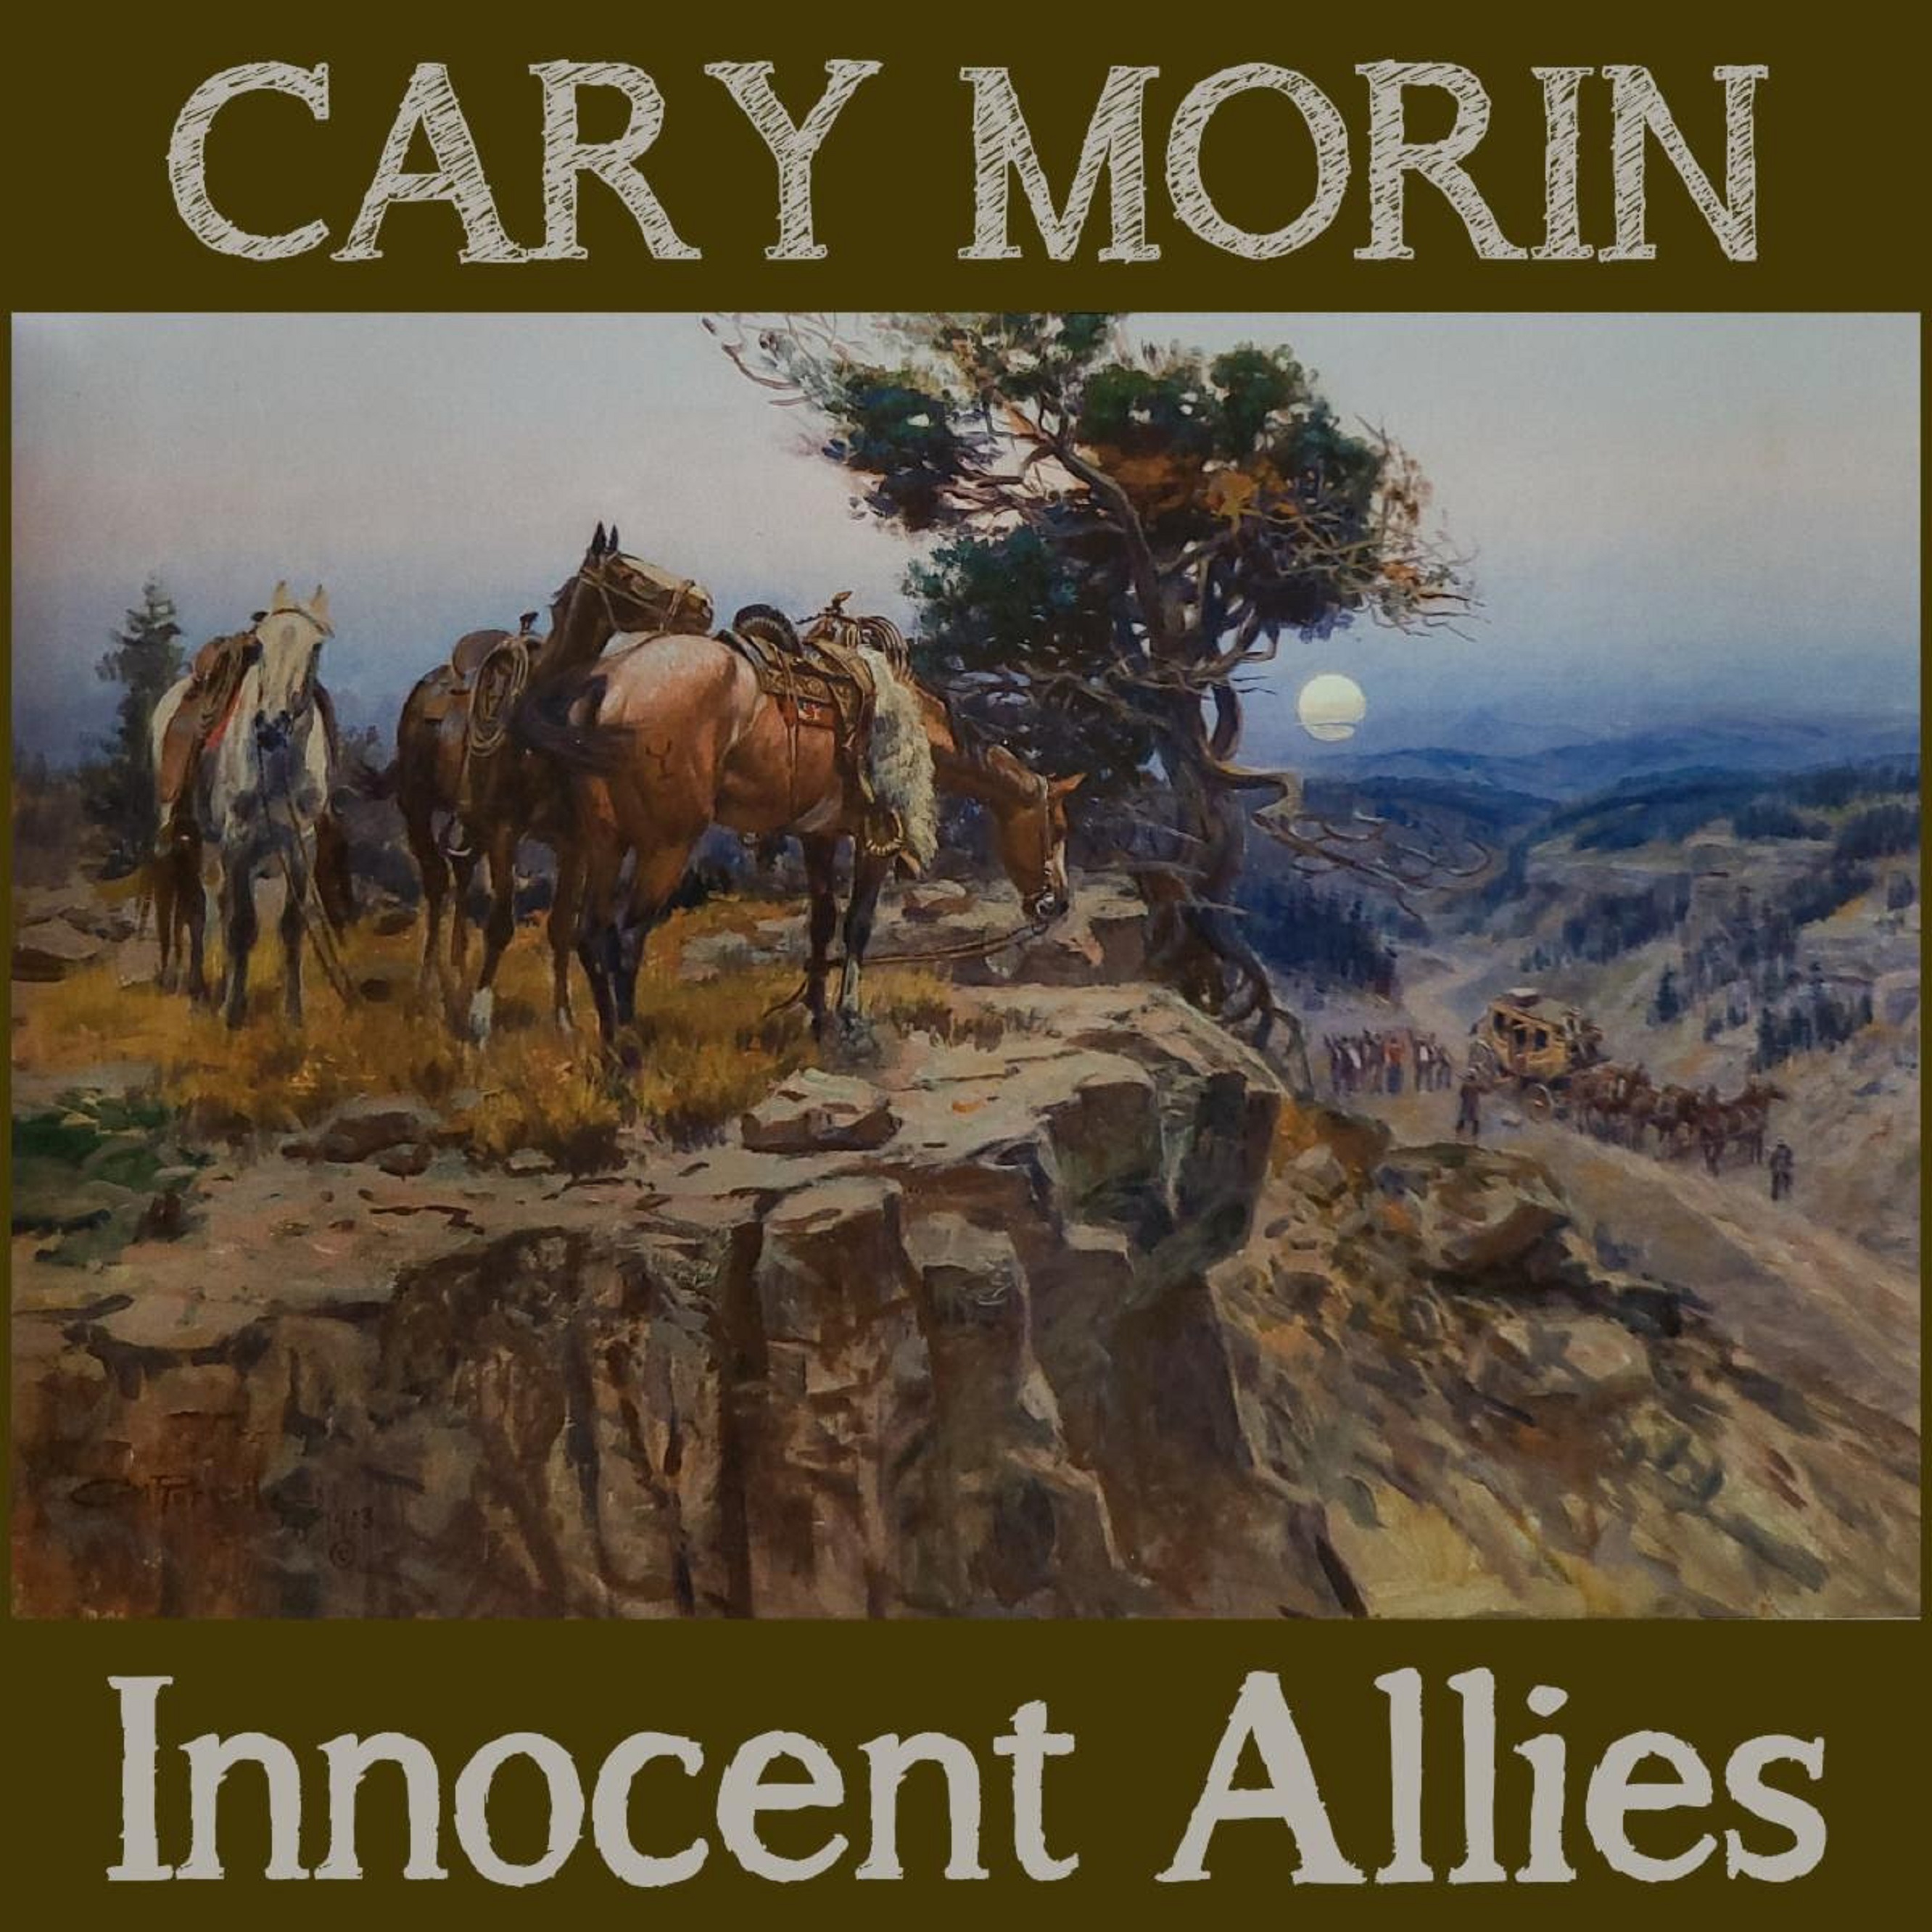 Cary Morin’s All-New Album Innocent Allies Draws Heavily From The Art Of Famed Western Painter Charles M. Russell